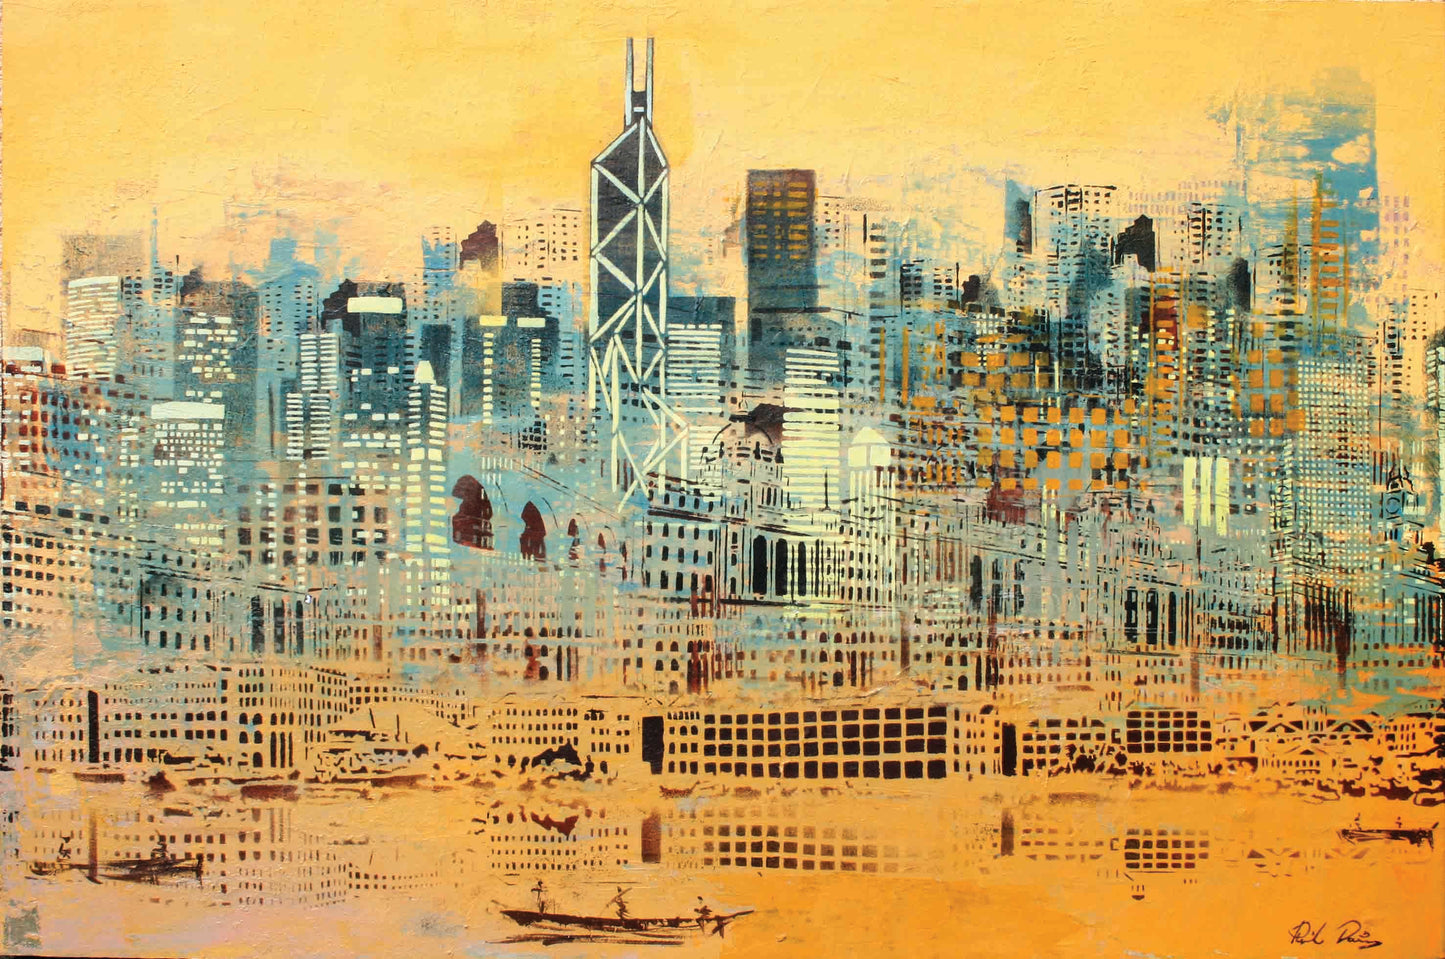 Time travelled, the Hong Kong skyline through the ages